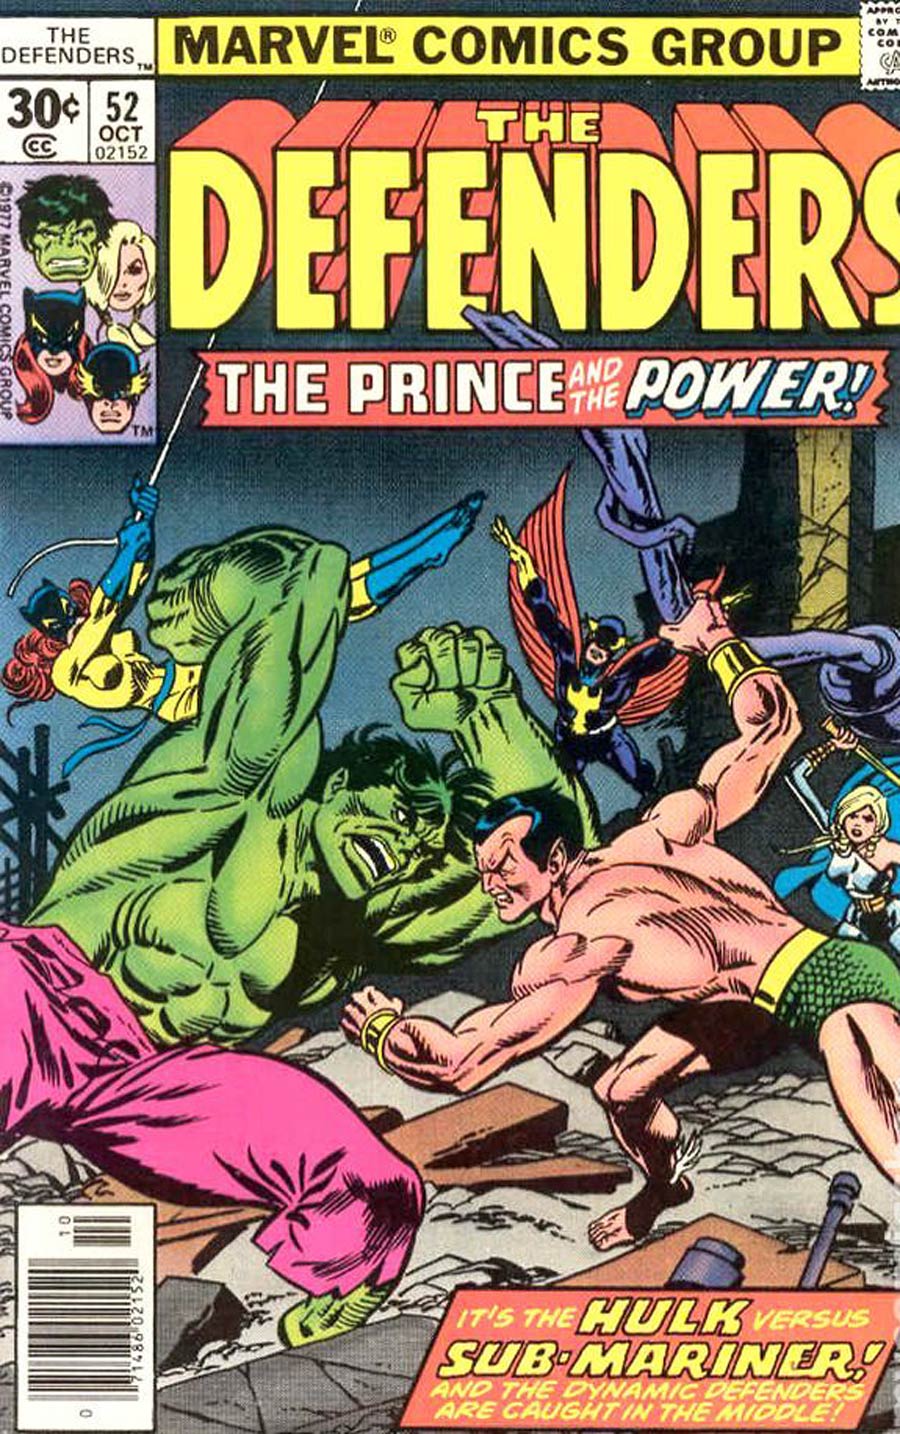 Defenders #52 Cover A 30-Cent Regular Edition